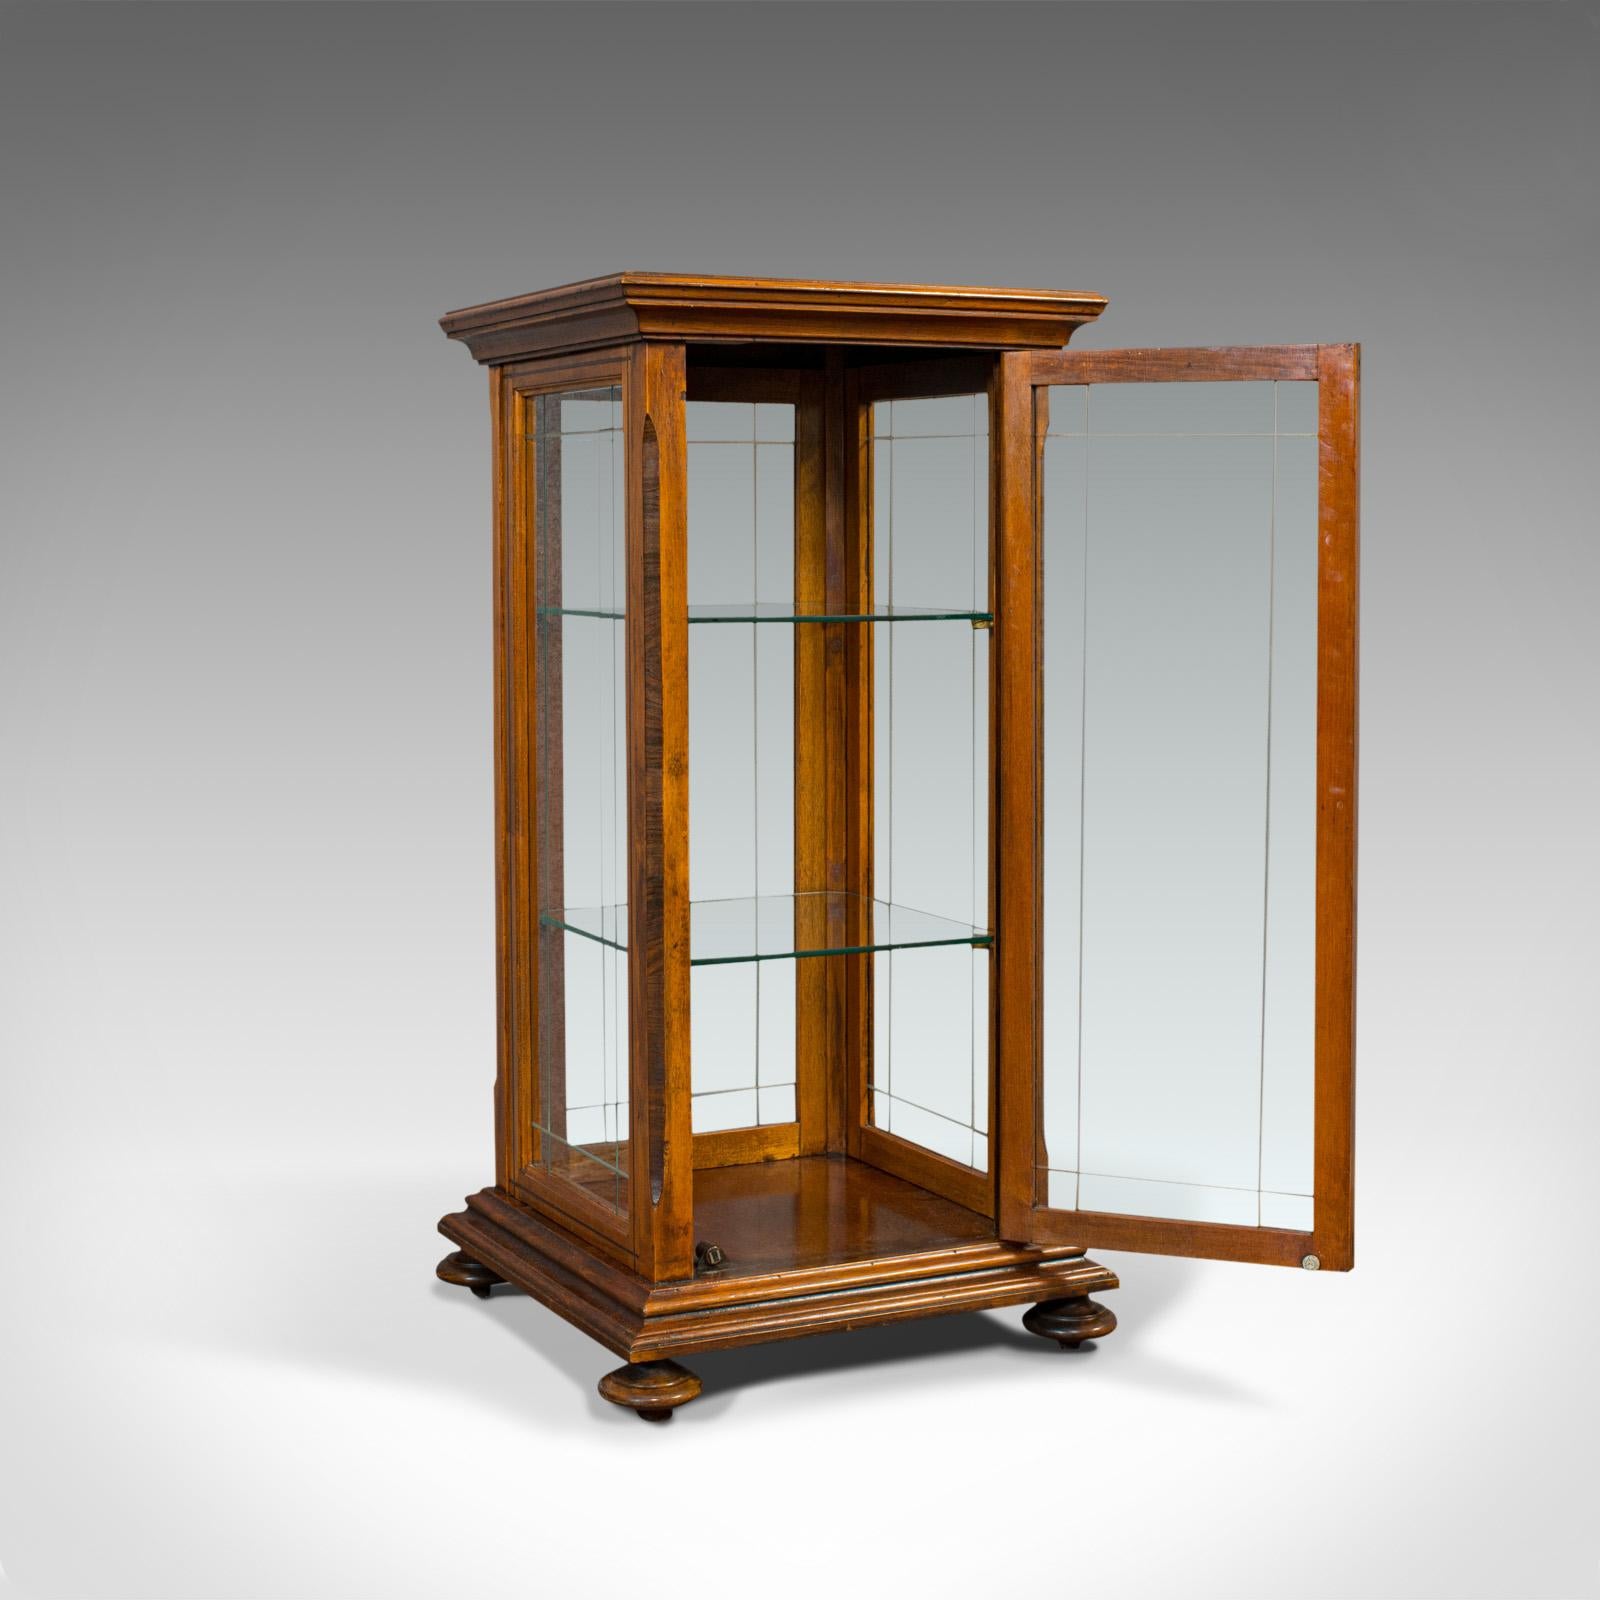 This is an antique shop display cabinet. An English, oak and walnut showcase, dating to the Edwardian period, circa 1910.

Beautifully glazed cabinet
Displays a desirable aged patina
Oak shows fine grain interest and pleasing caramel